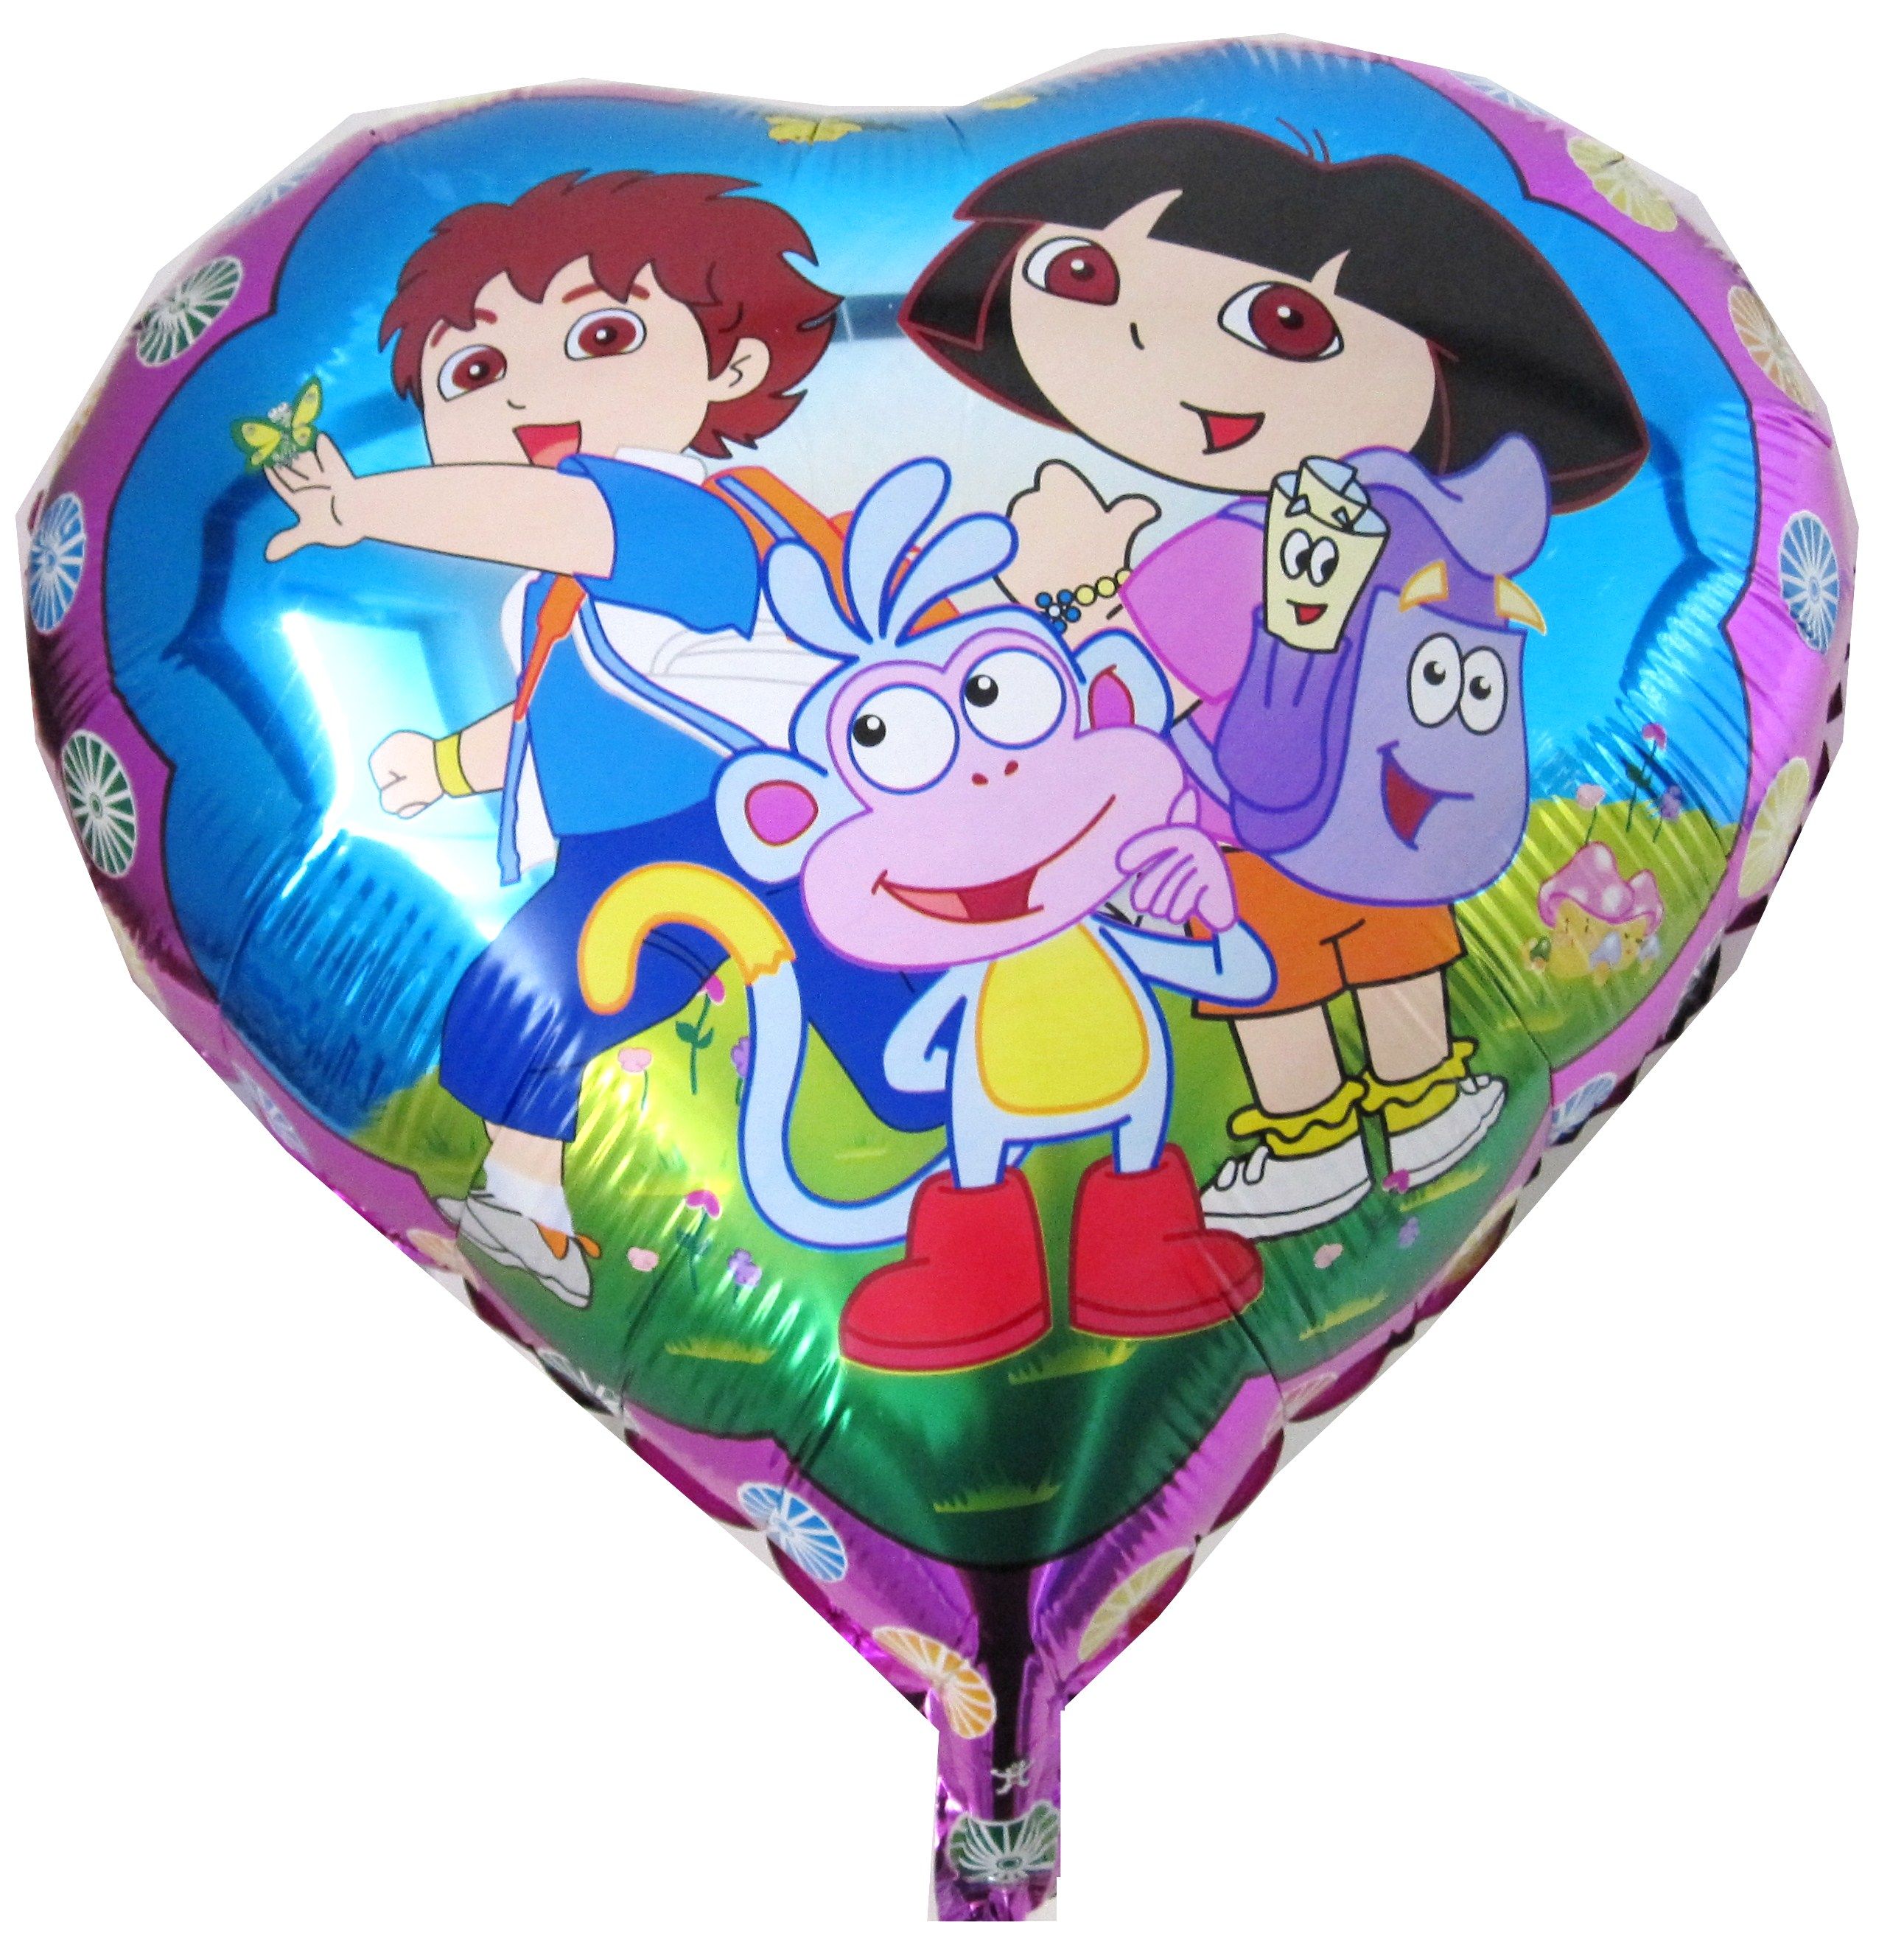 This Dora the Explorer and Go Diego Go foil balloon measures approx